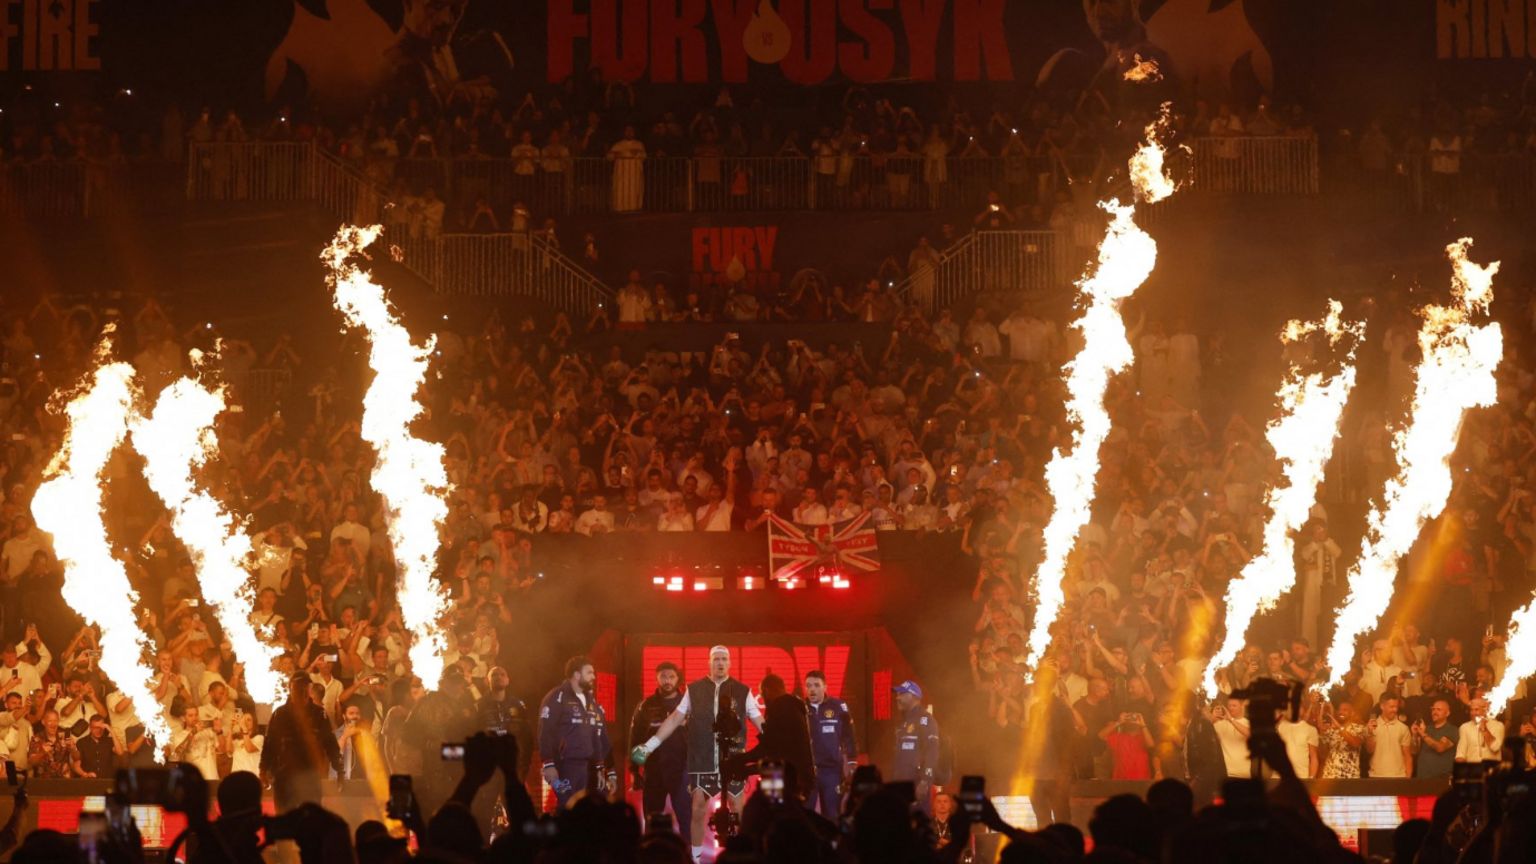 Tyson Fury enters an arena flanked by fire